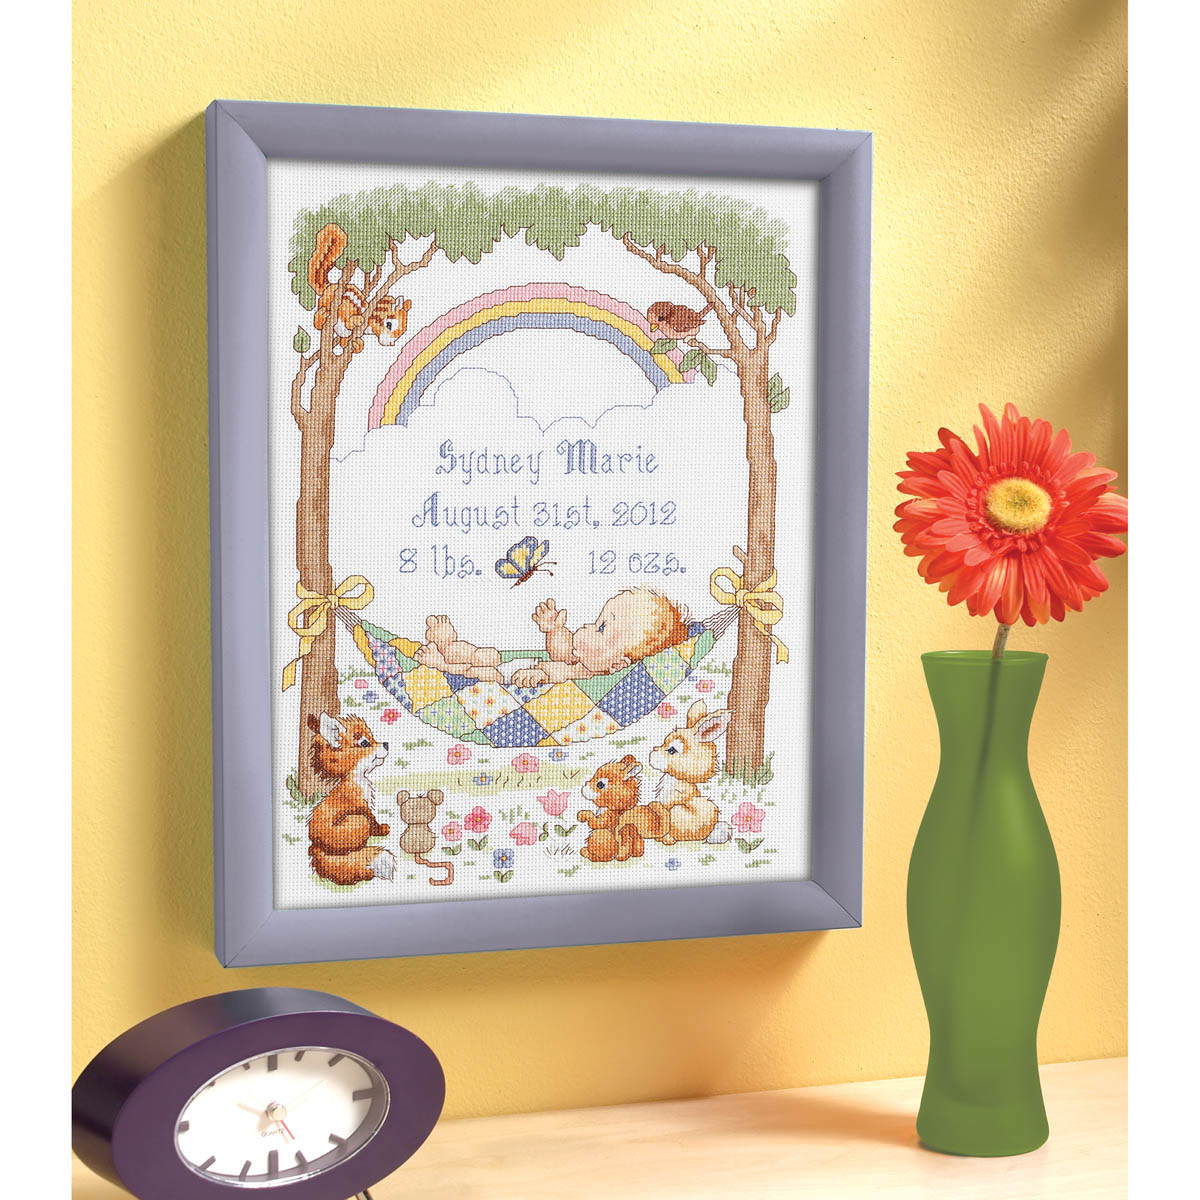 Bucilla ® Baby - Counted Cross Stitch - Crib Ensembles - Our Little Blessing - Birth Record Kit - 45